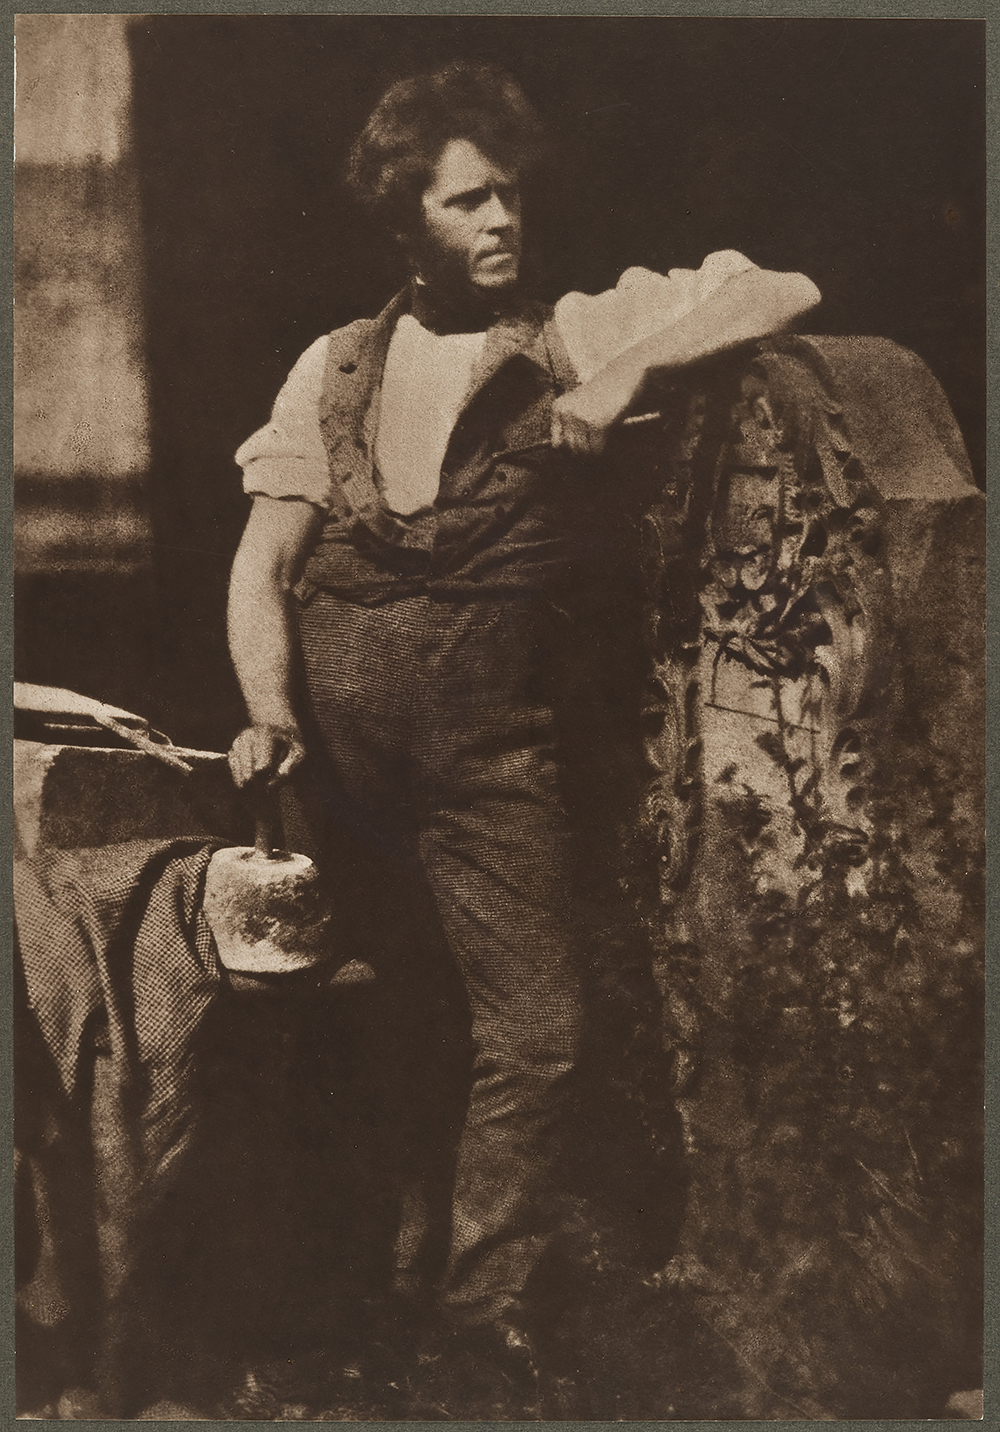 Aged, sepia photograph of a man in victorian dress, posed leaning on a gravestone, his other hand resting on stonemasonry equipment and tools.